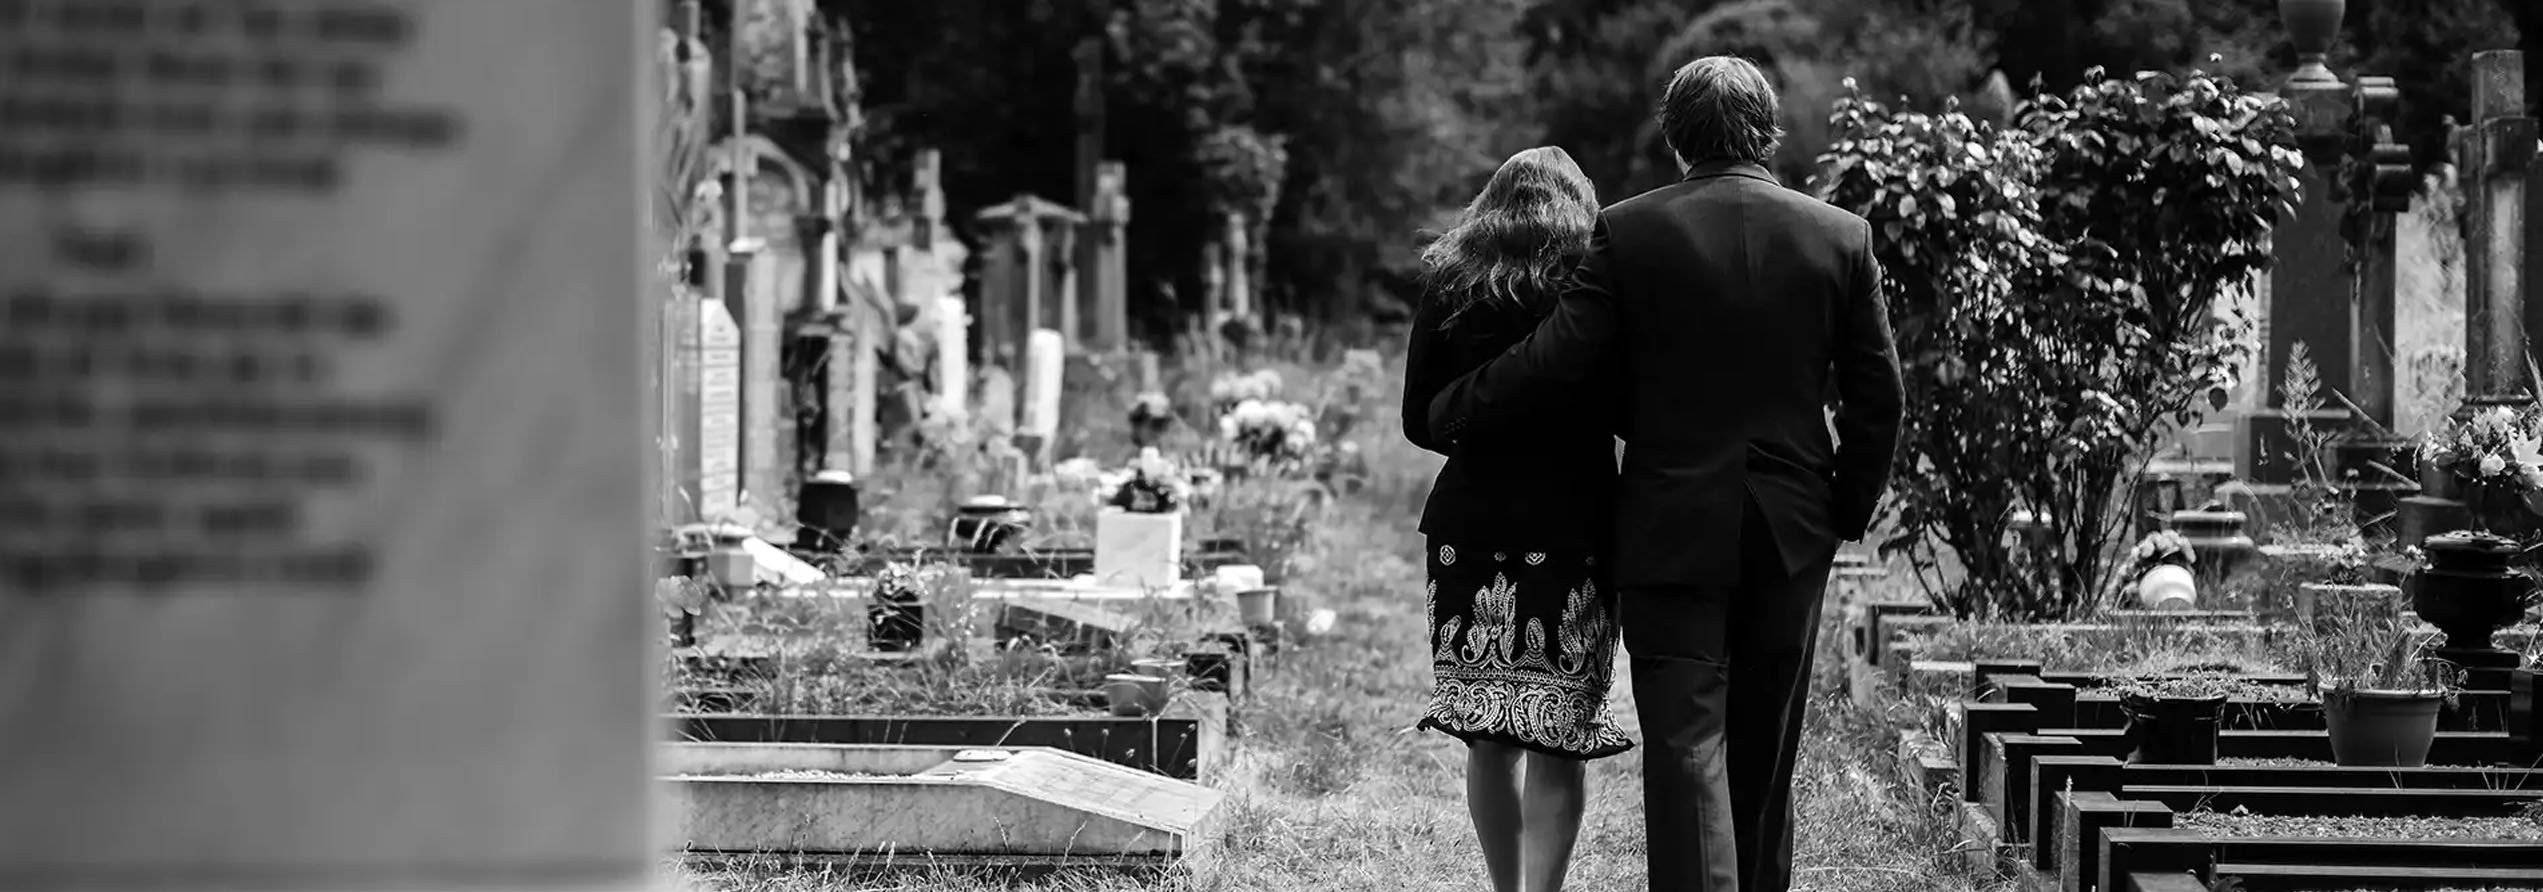 New Jersey & New York City Wrongful Death Attorneys | Personal Injury Attorney John Anzalone, Barry Cooke